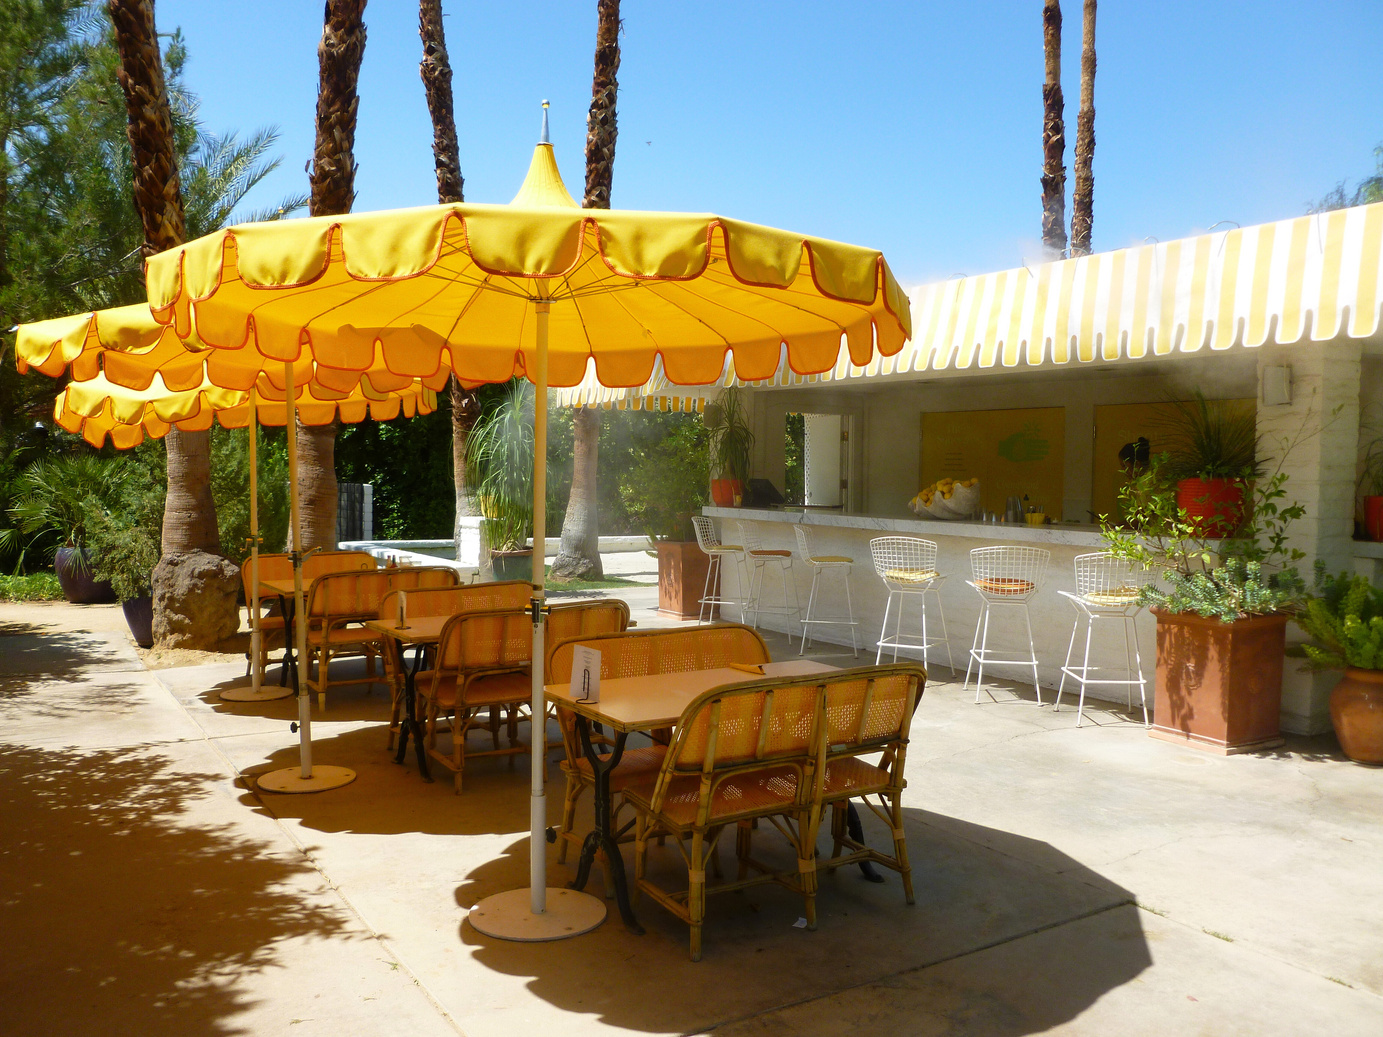 The Lemonade Stand at the Parker Palm Springs in Palm Springs.